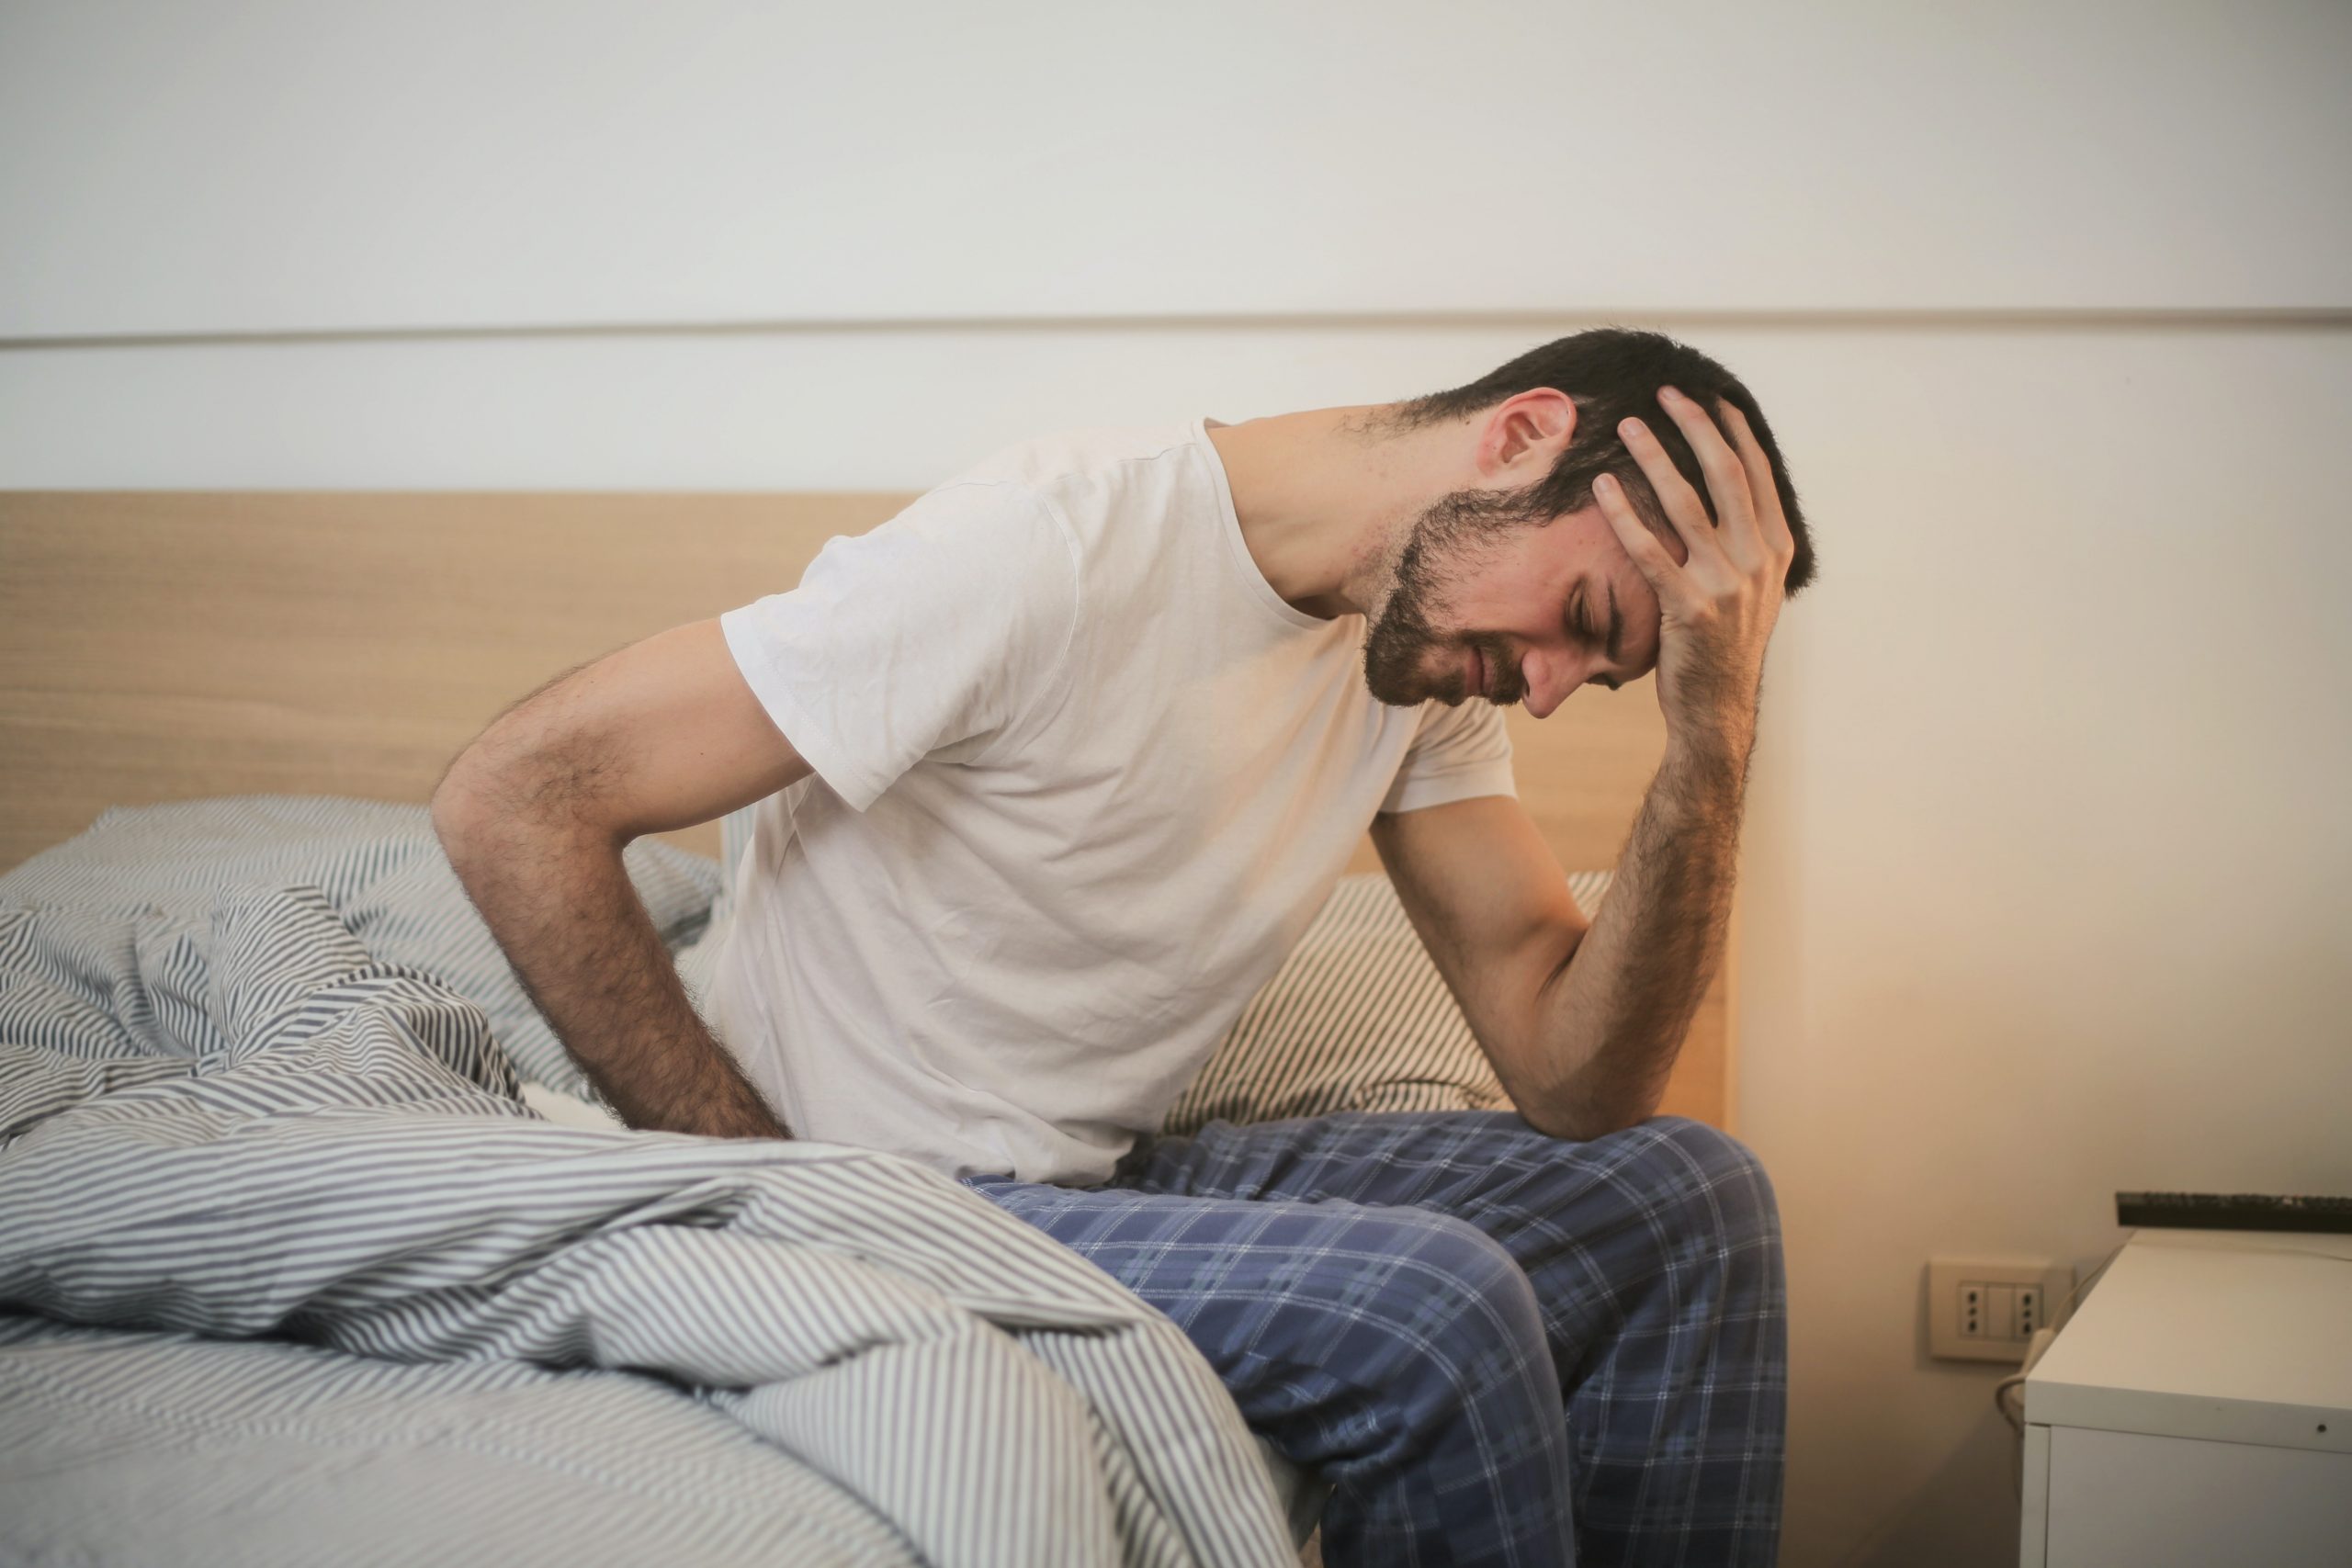 A man sits on the edge of a bed looking ashamed